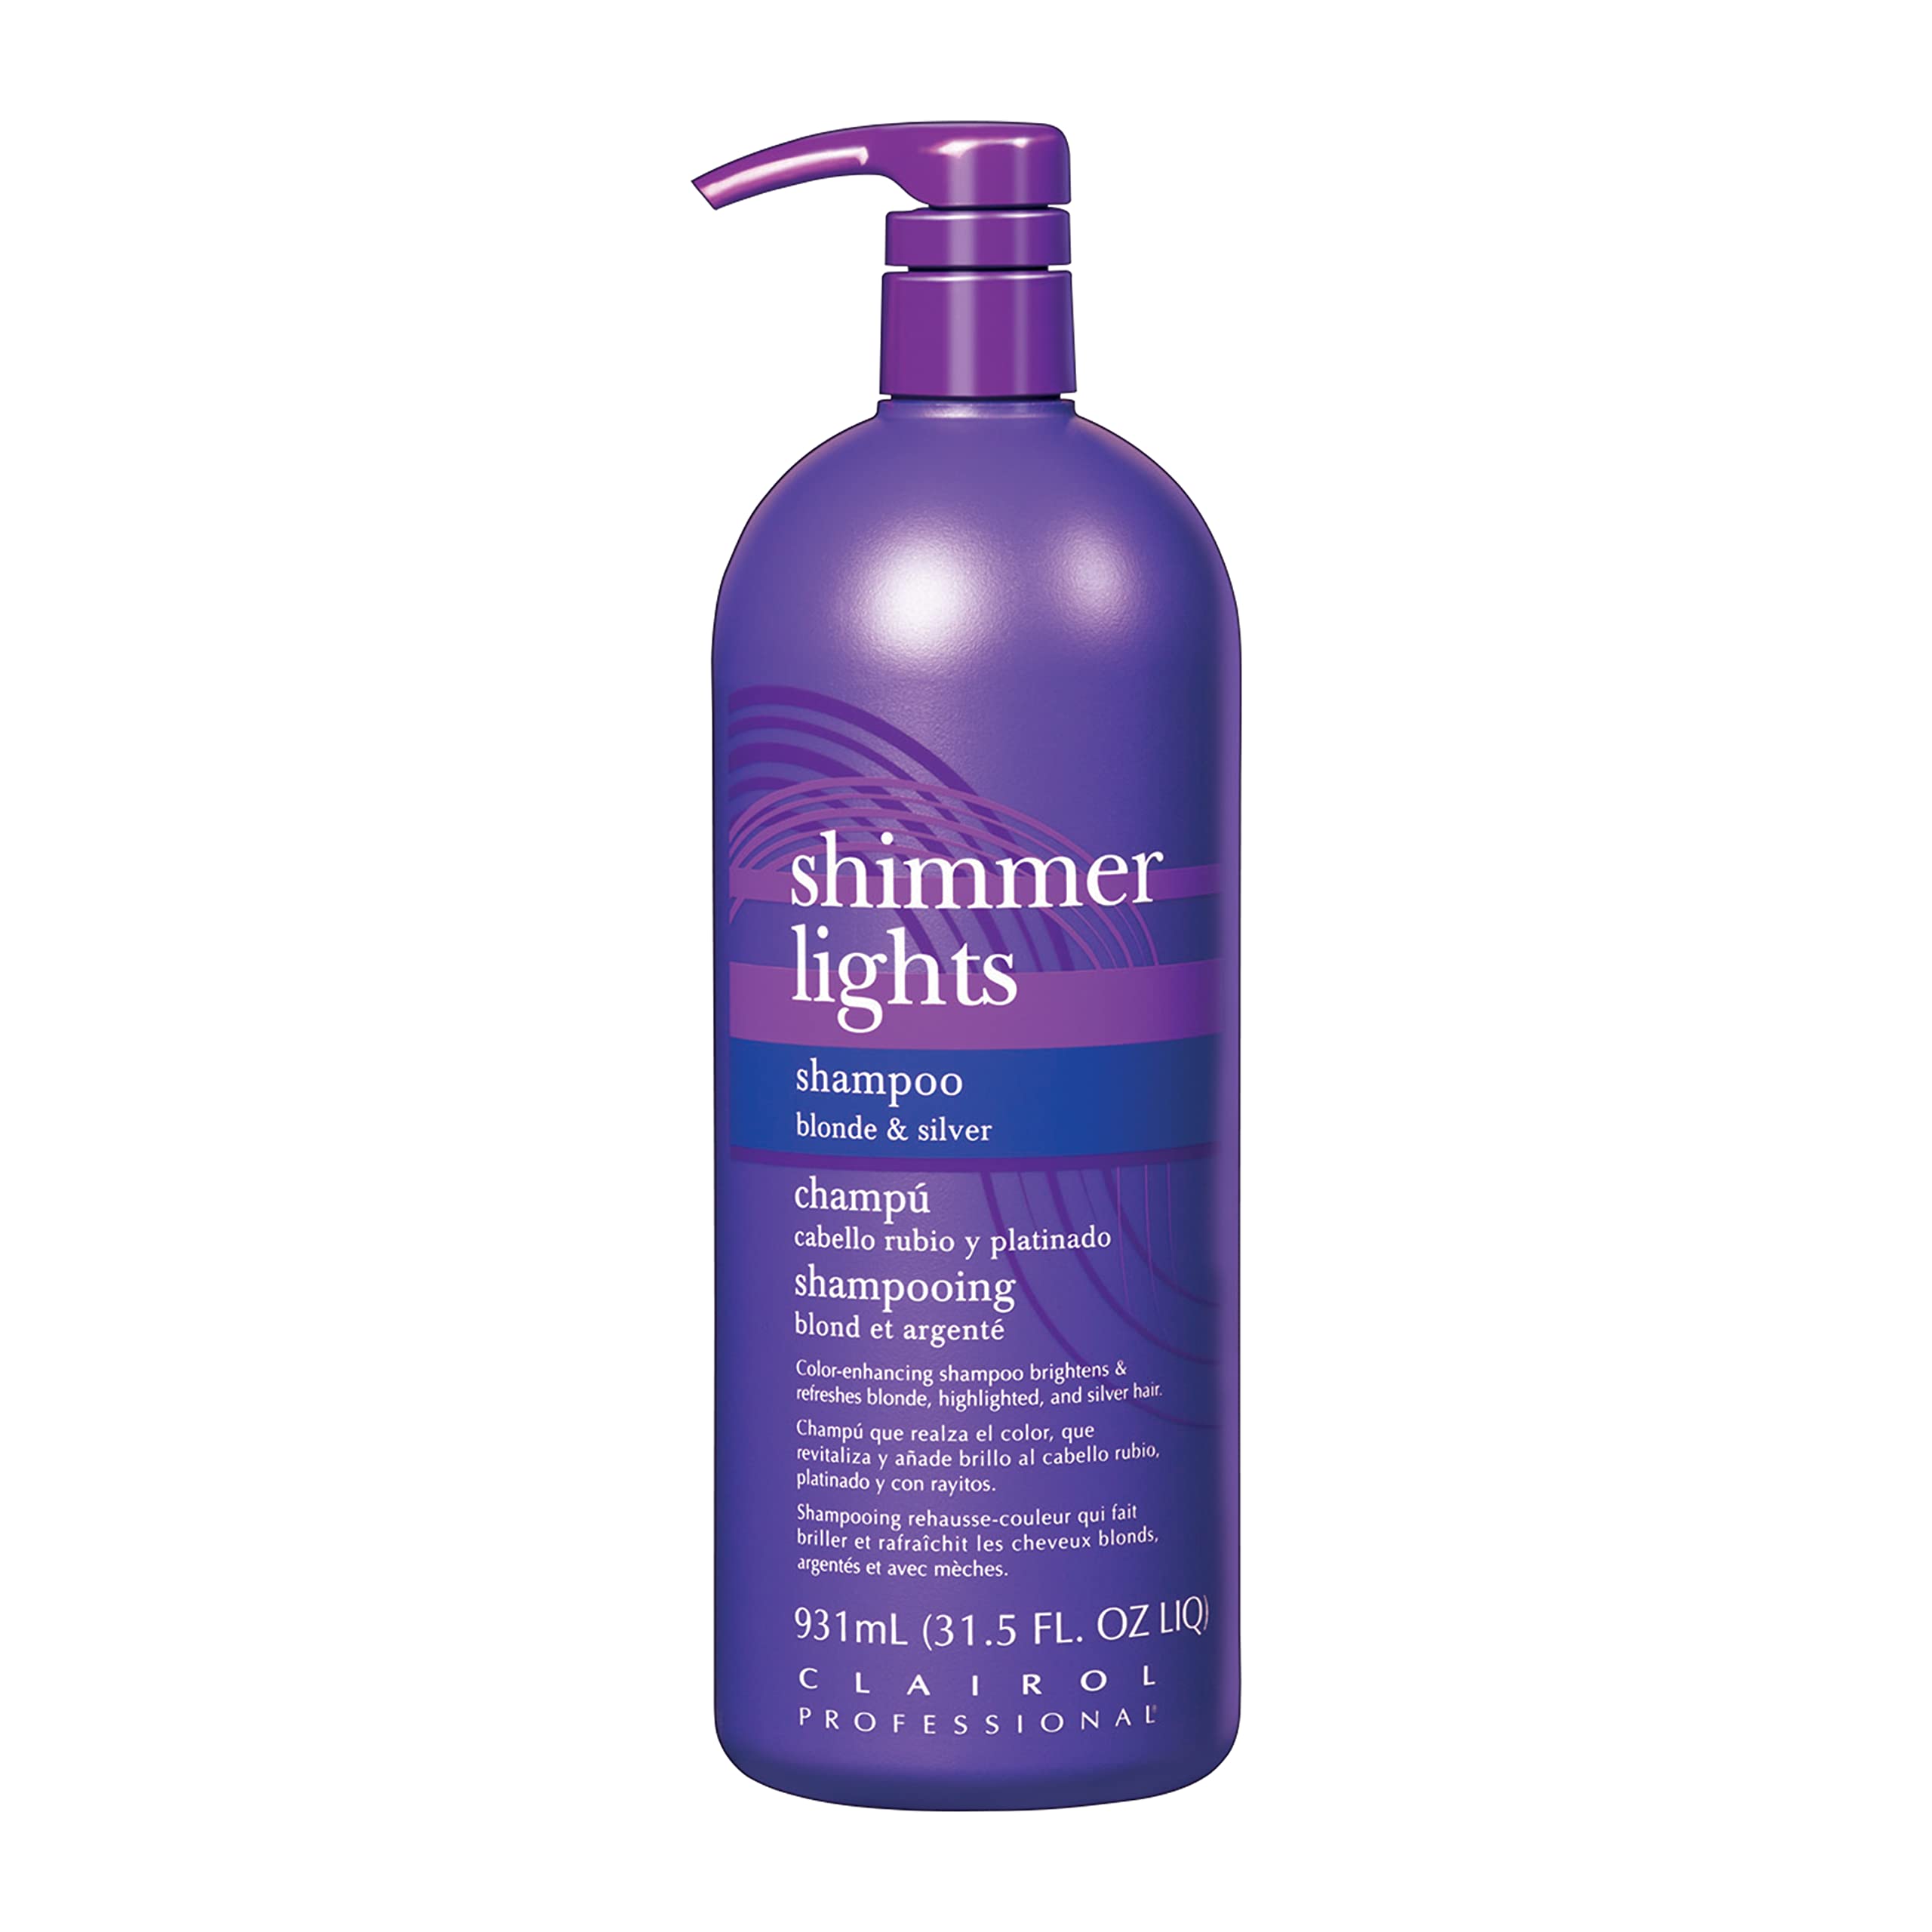 Clairol Professional Shimmer Lights Purple Shampoo, 31.5 fl. Oz | Neutralizes Brass & Yellow Tones | For Blonde, Silver, Gray & Highlighted Hair